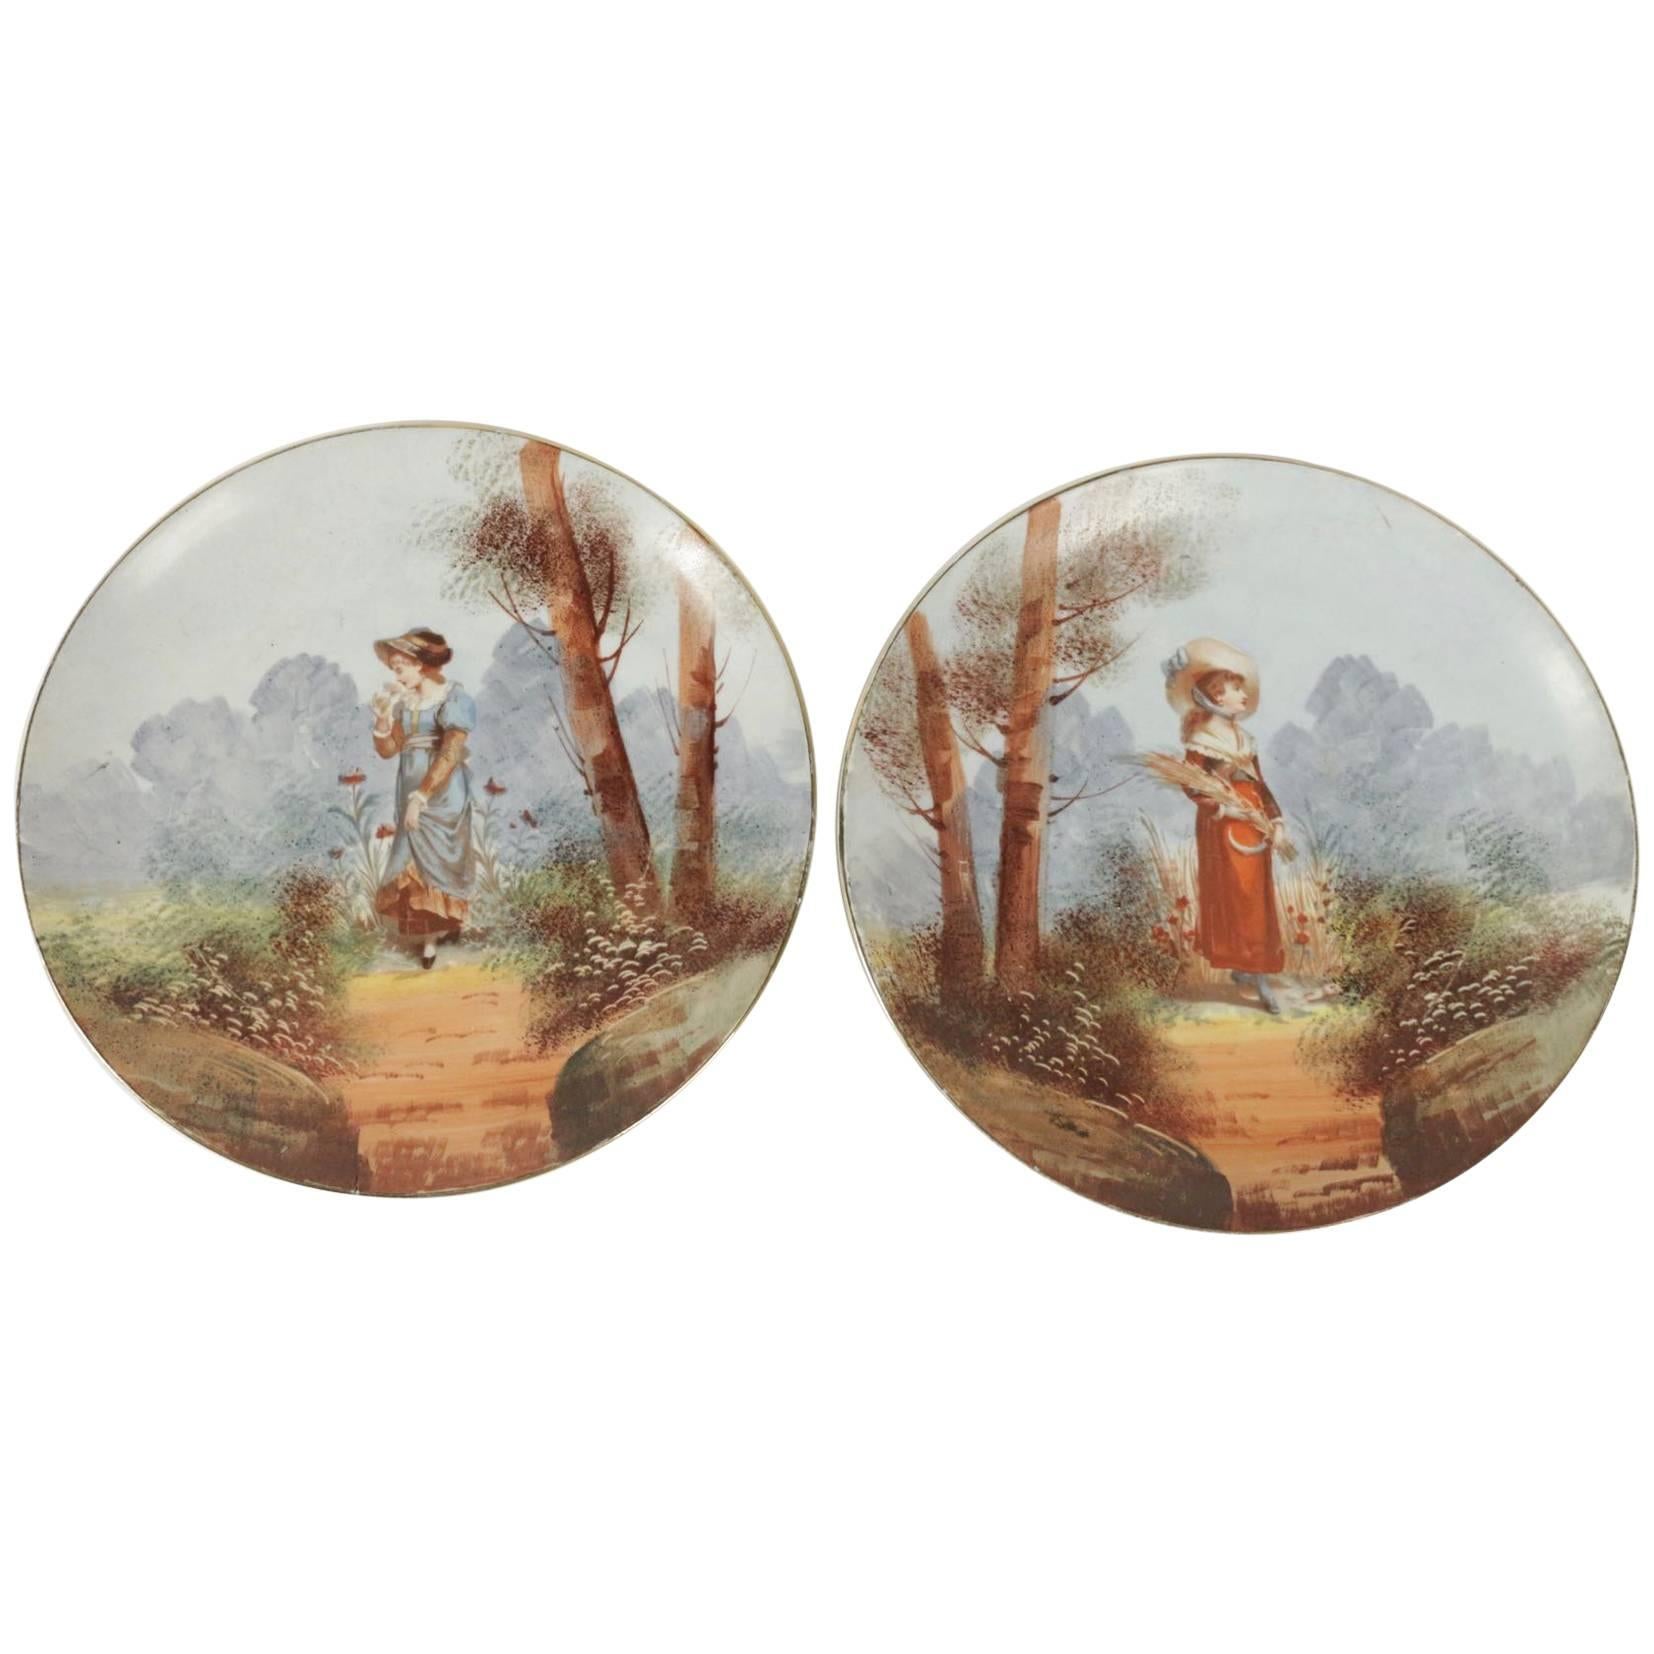 Pair of French Porcelain Hand-Painted Plates from the 19th Century